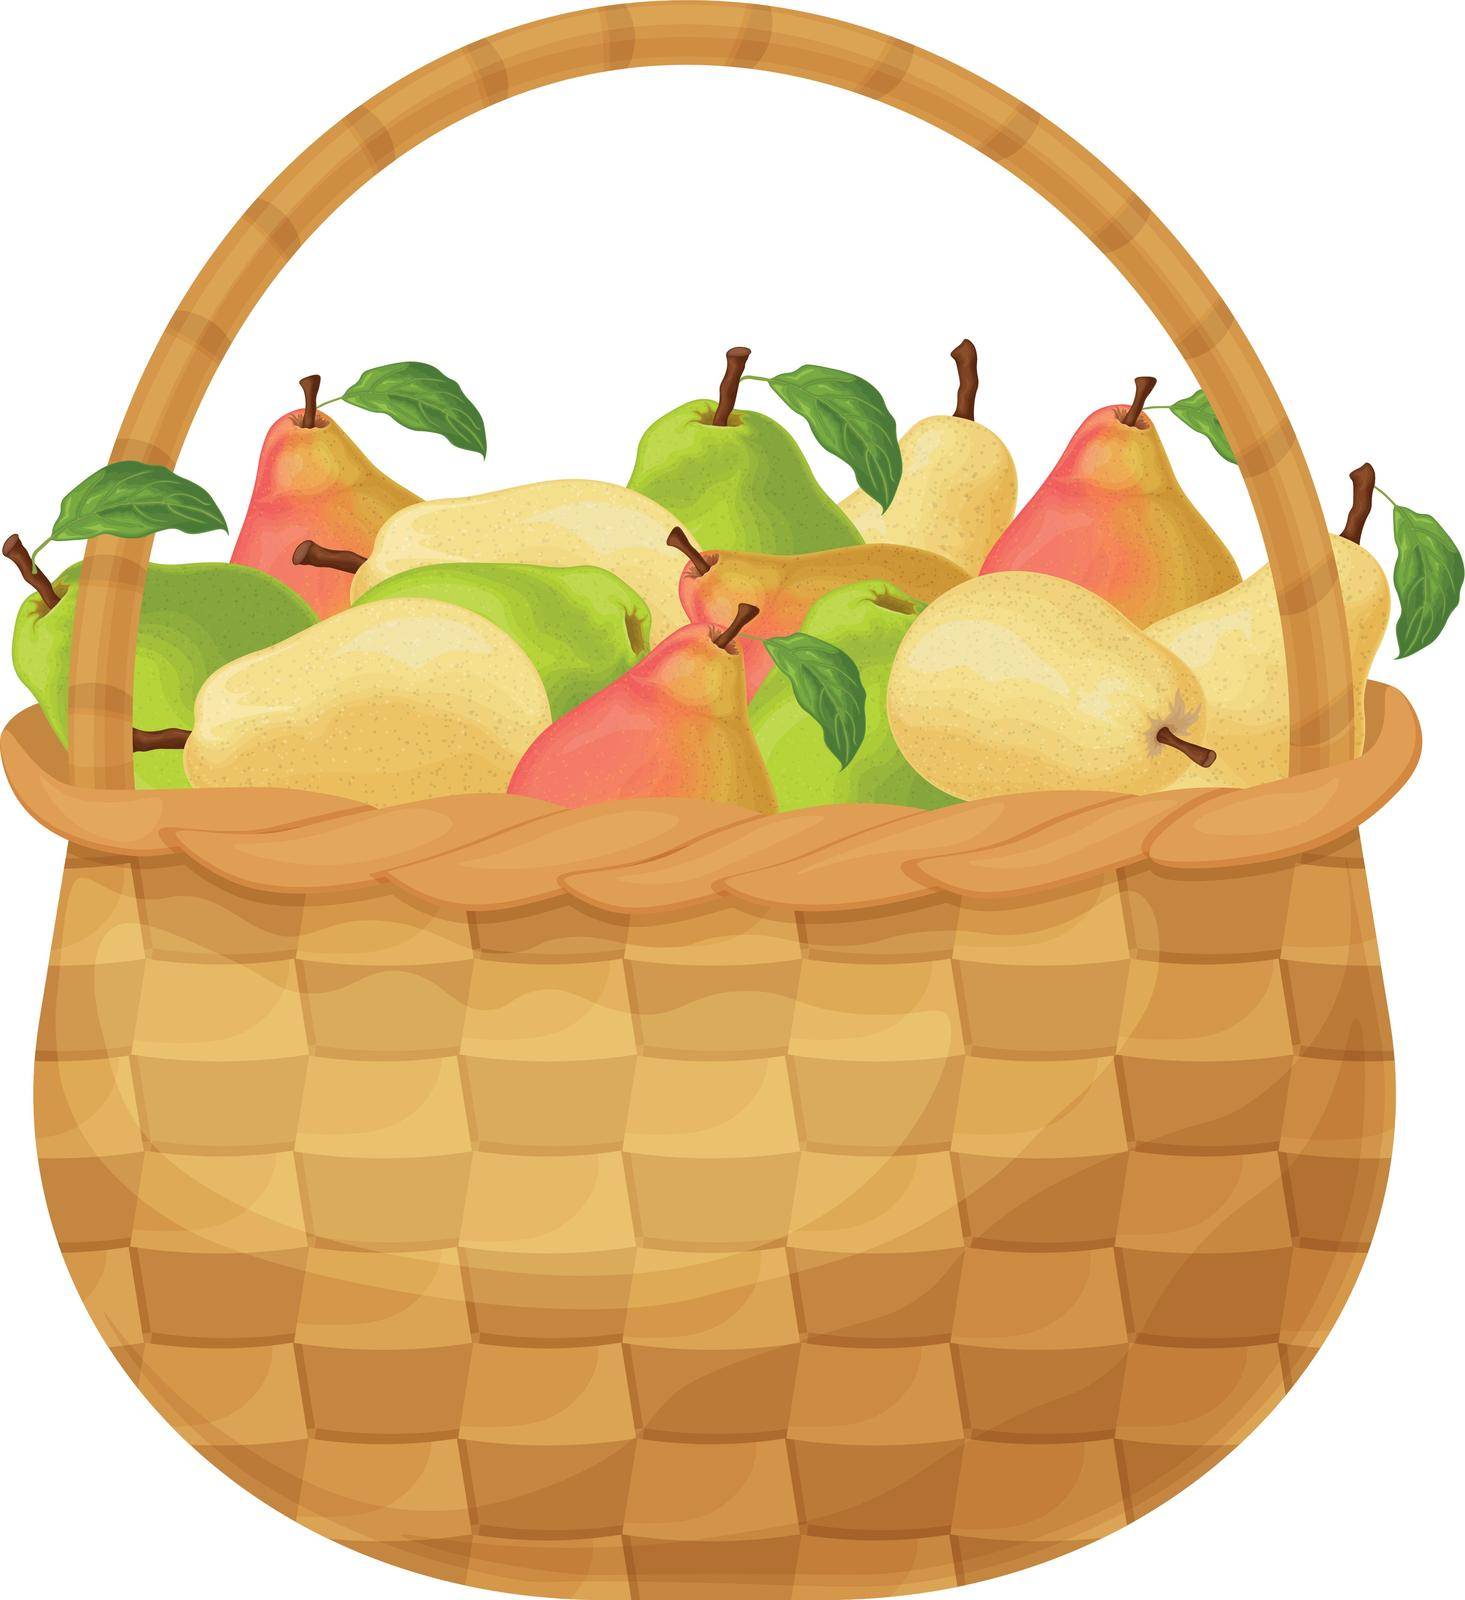 Pears. Basket with pears. Ripe pear fruits in a basket. Fresh garden fruits. Juicy pears in the basket. Vector illustration isolated on a white background